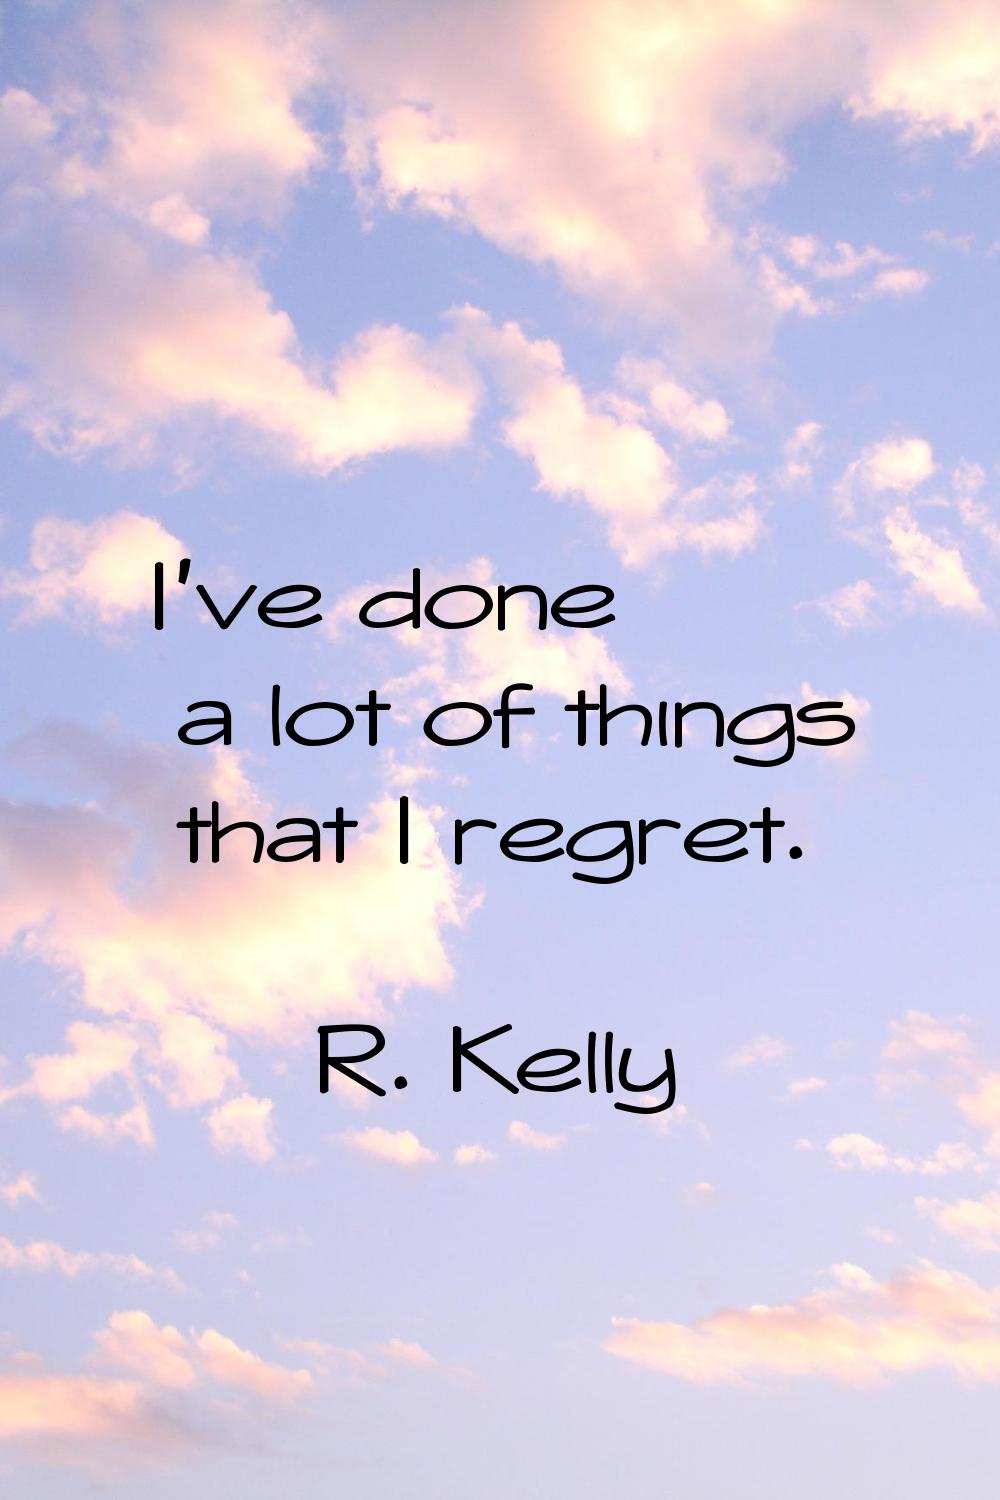 I've done a lot of things that I regret.